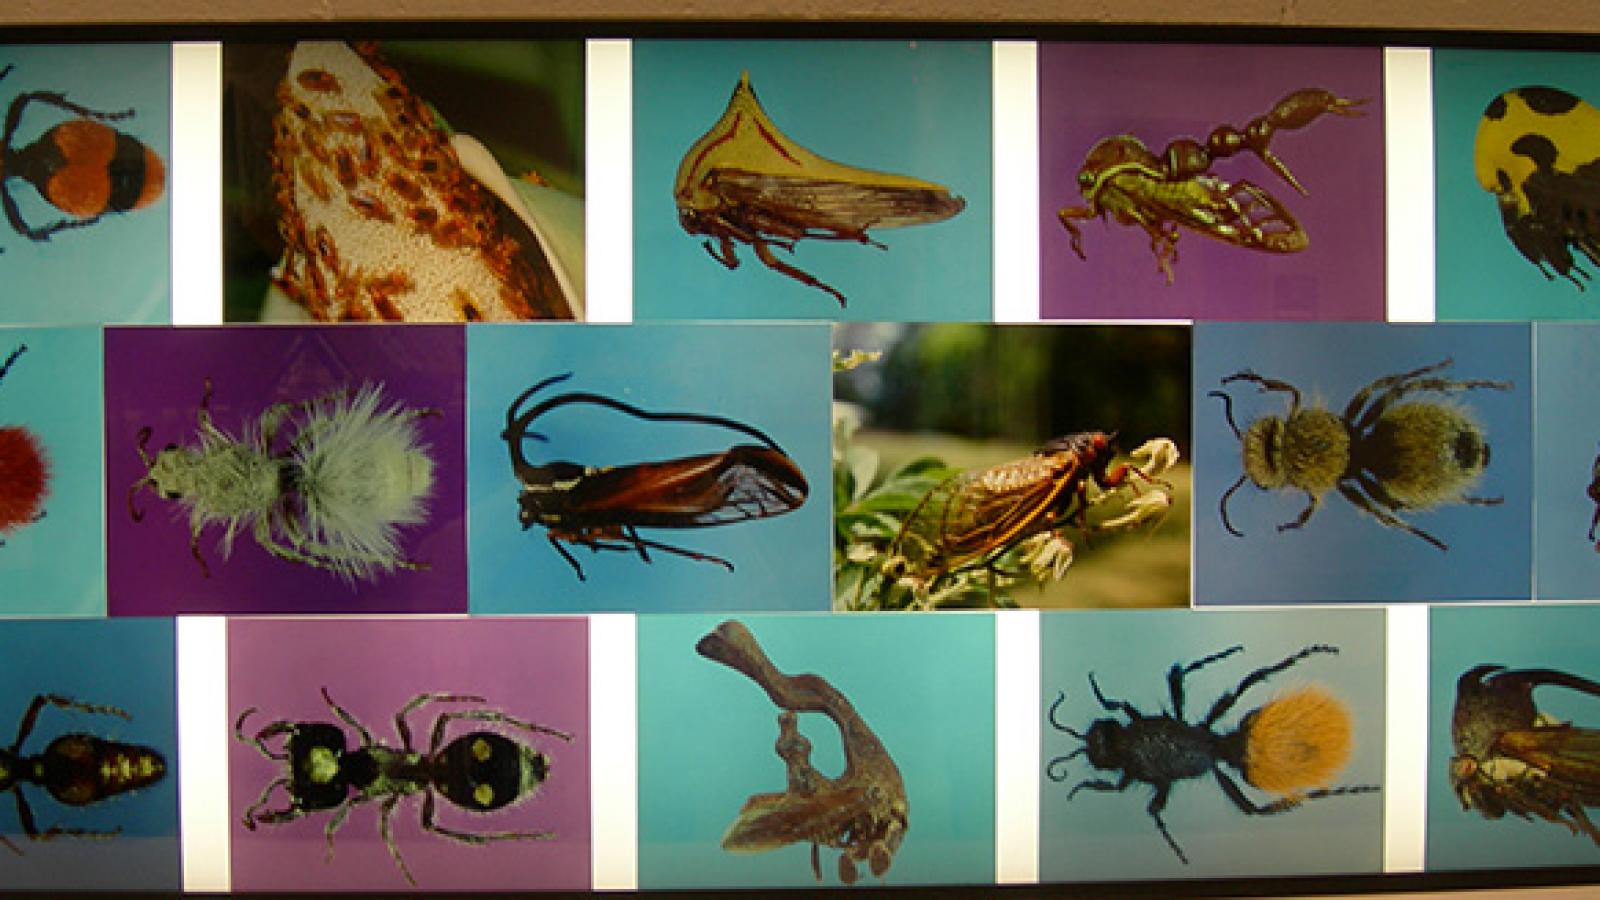 Insect photo display at 2007 Open House